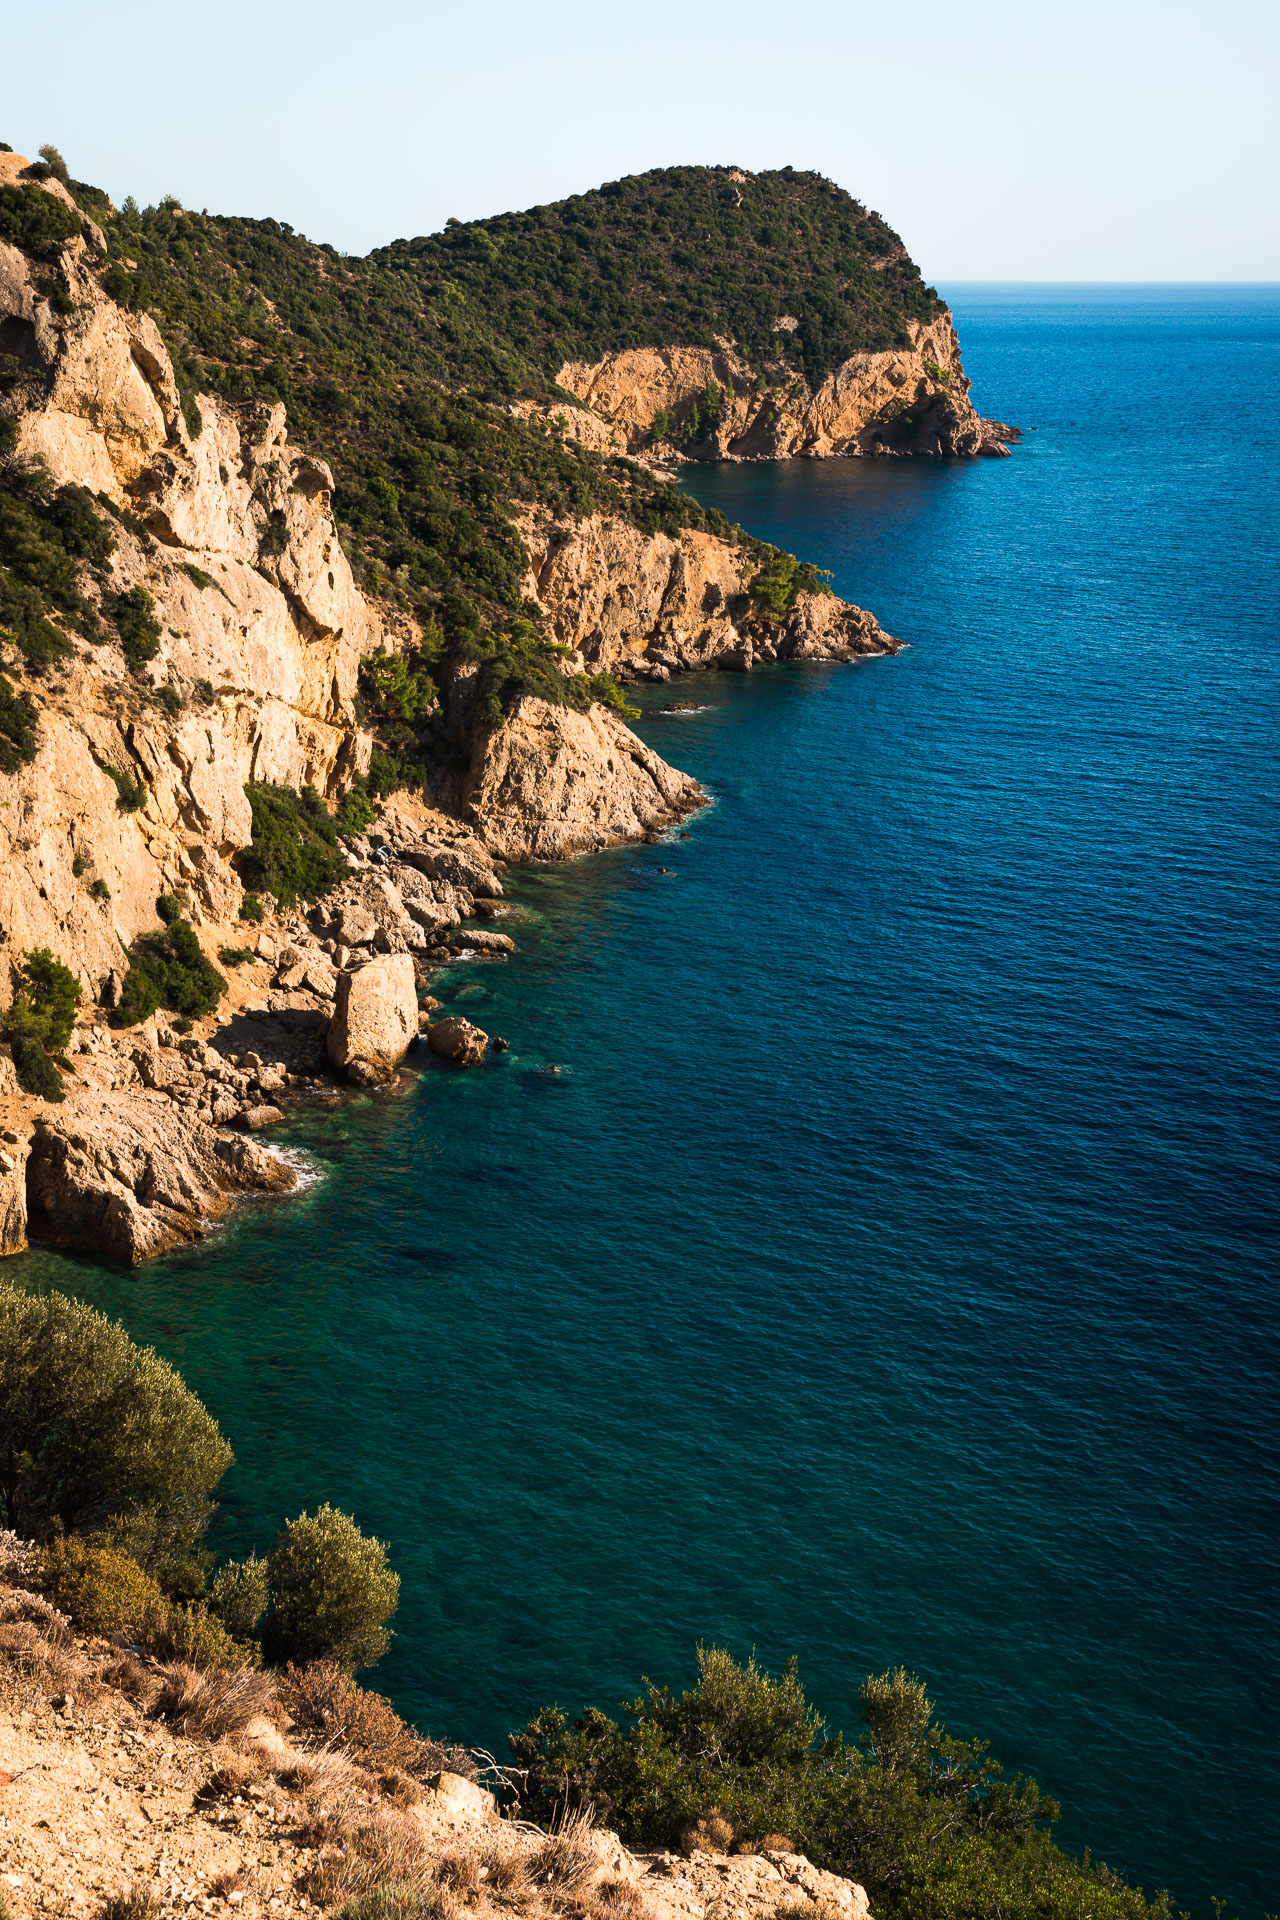 Photo of orange cliffs and blue sea with a car wreck on the bottom in Thassos, Greece.